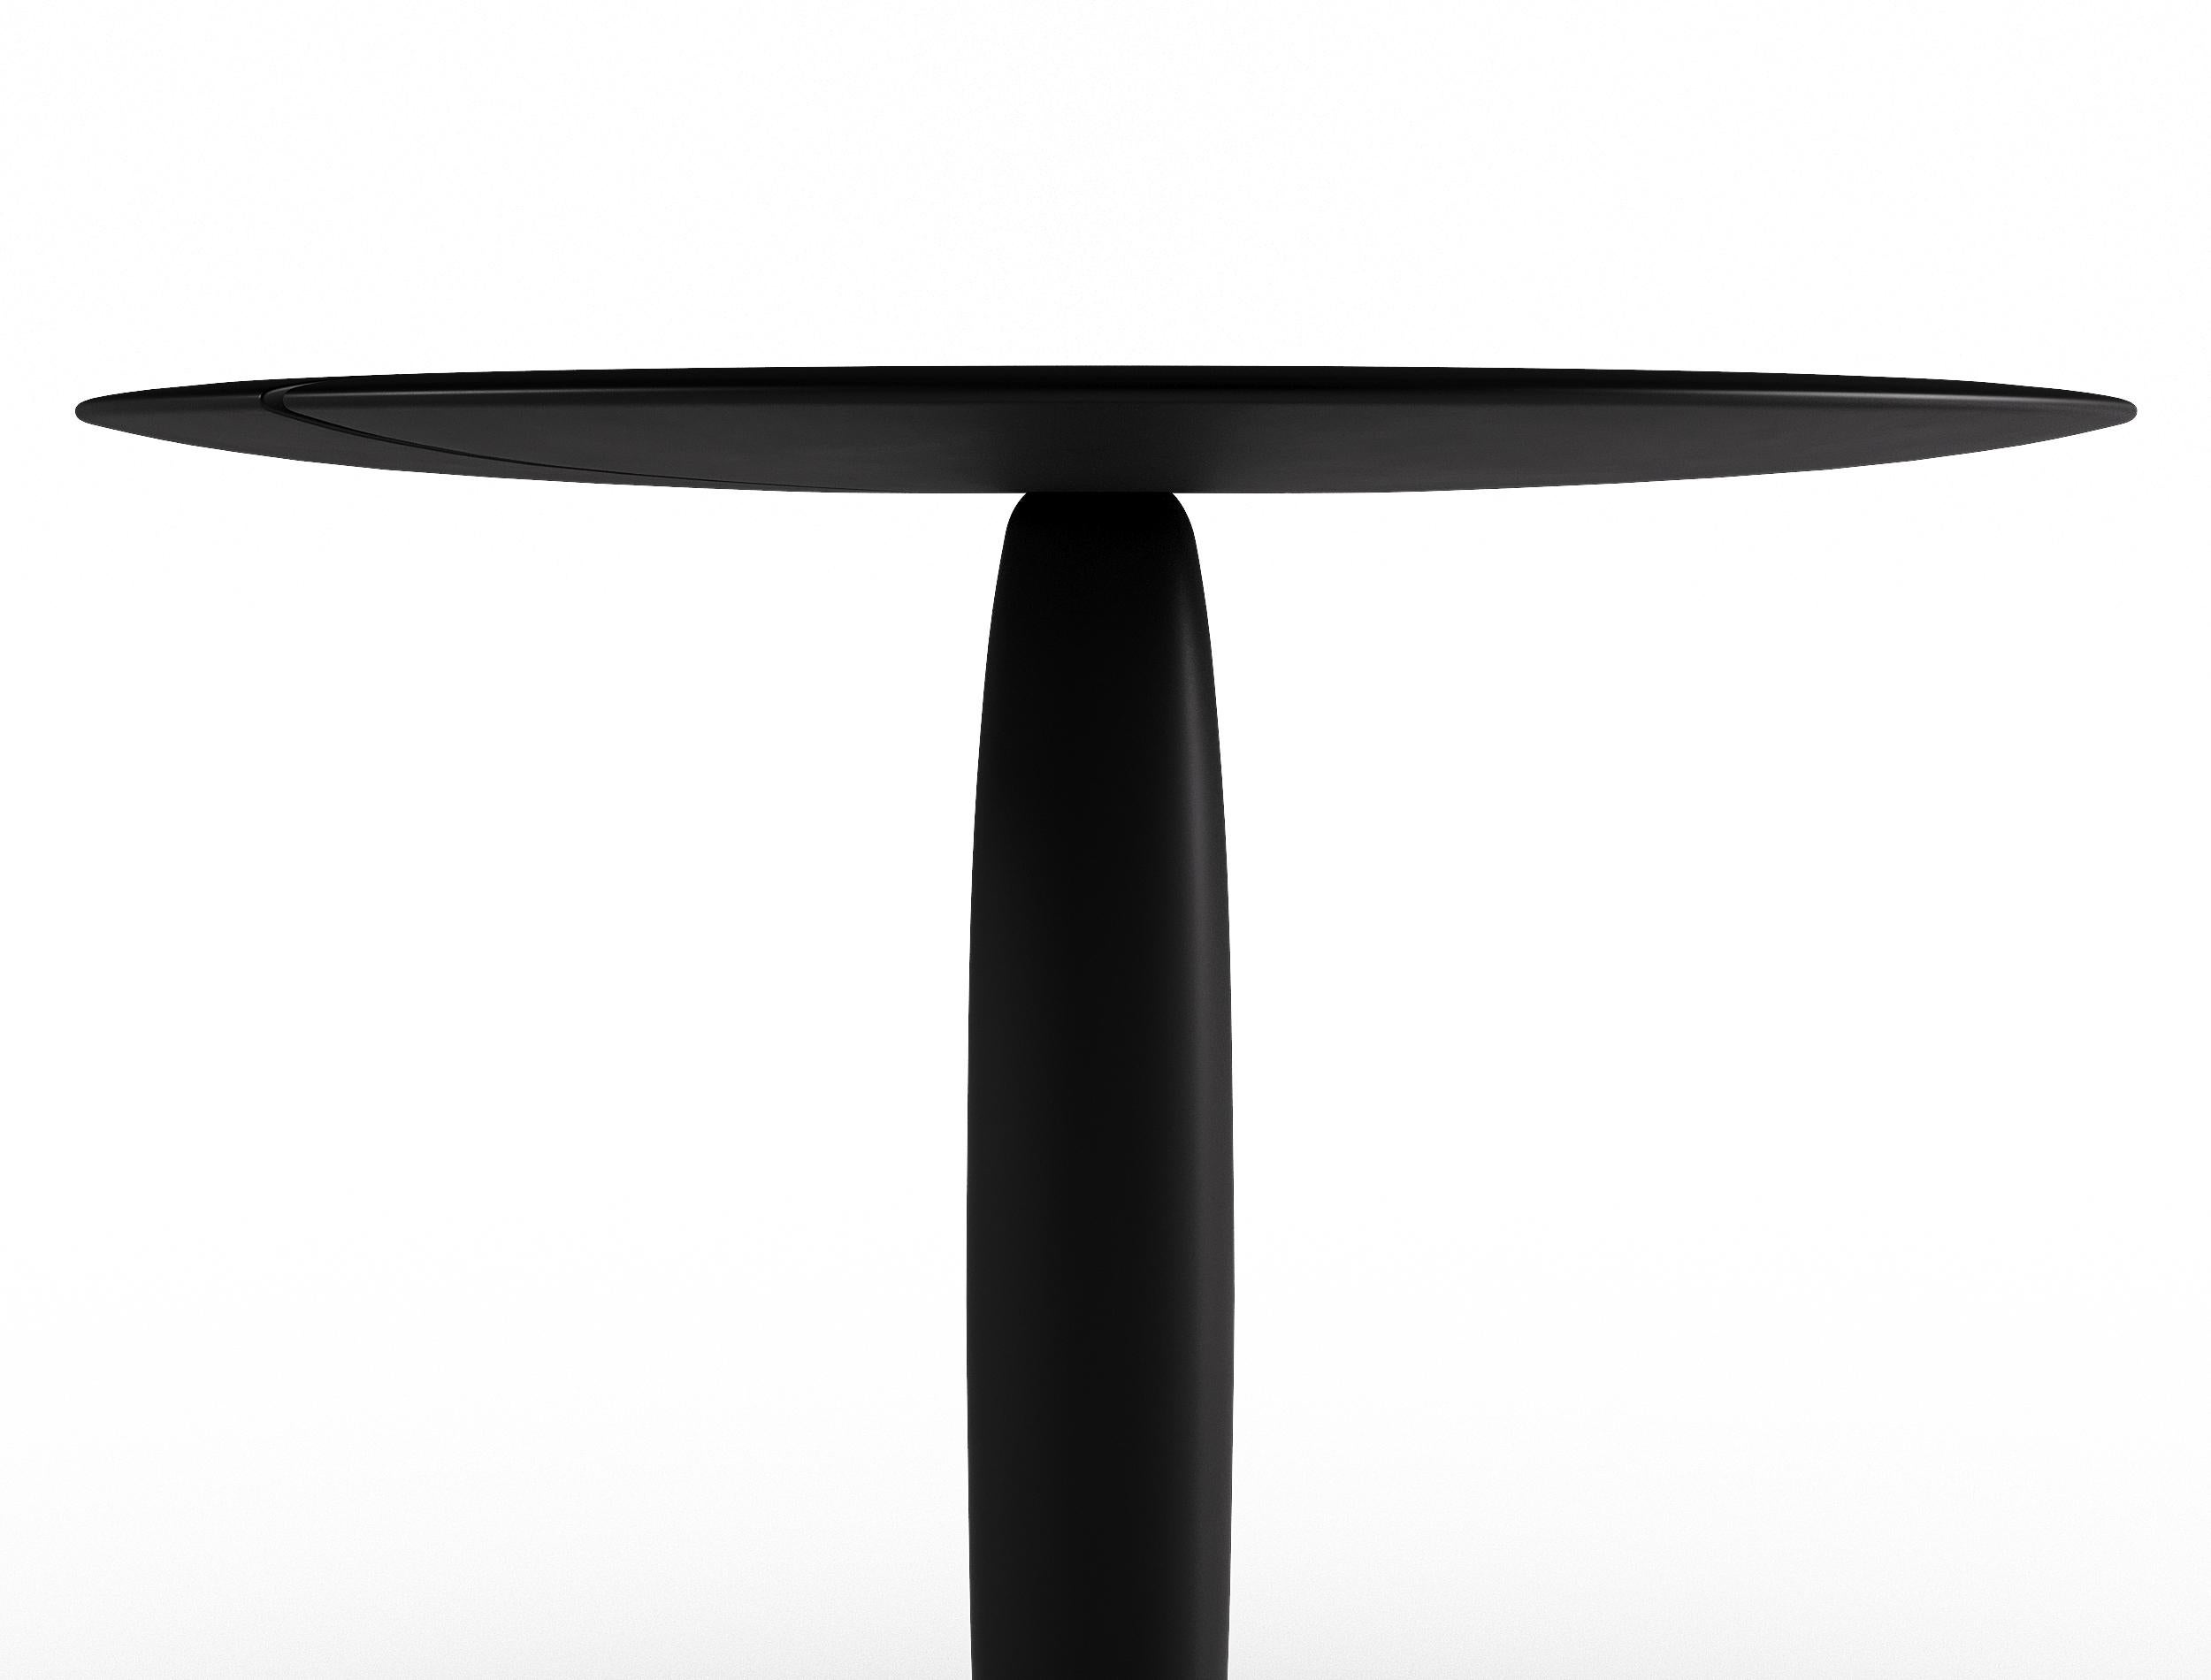 Une Table à Deux is divided in two sides, compiling the individuality and togetherness to achieve a supremely elegant ambiguity.

BI-lobed wooden top supported by sculptural foot inspired from the vanilla pod. 
Solid ebonized Acacia wood plays in